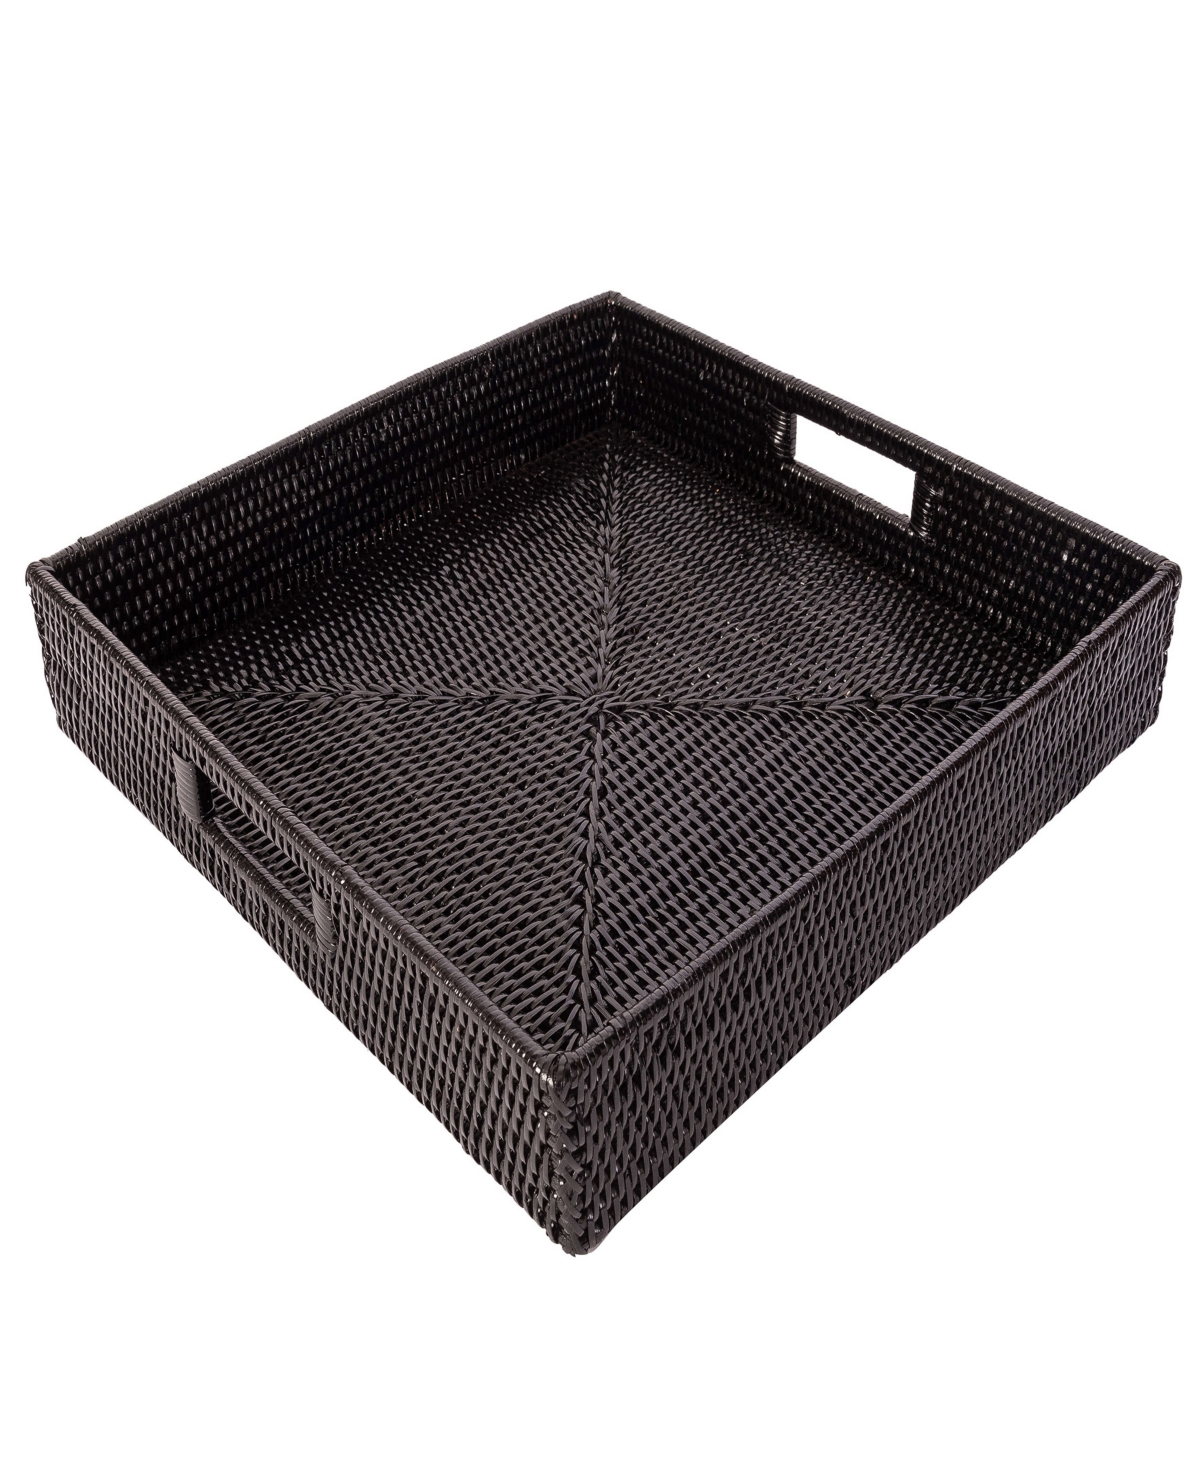 Artifacts Trading Company Rattan Square Serving Tray With Cutout Handles In Tudor Black